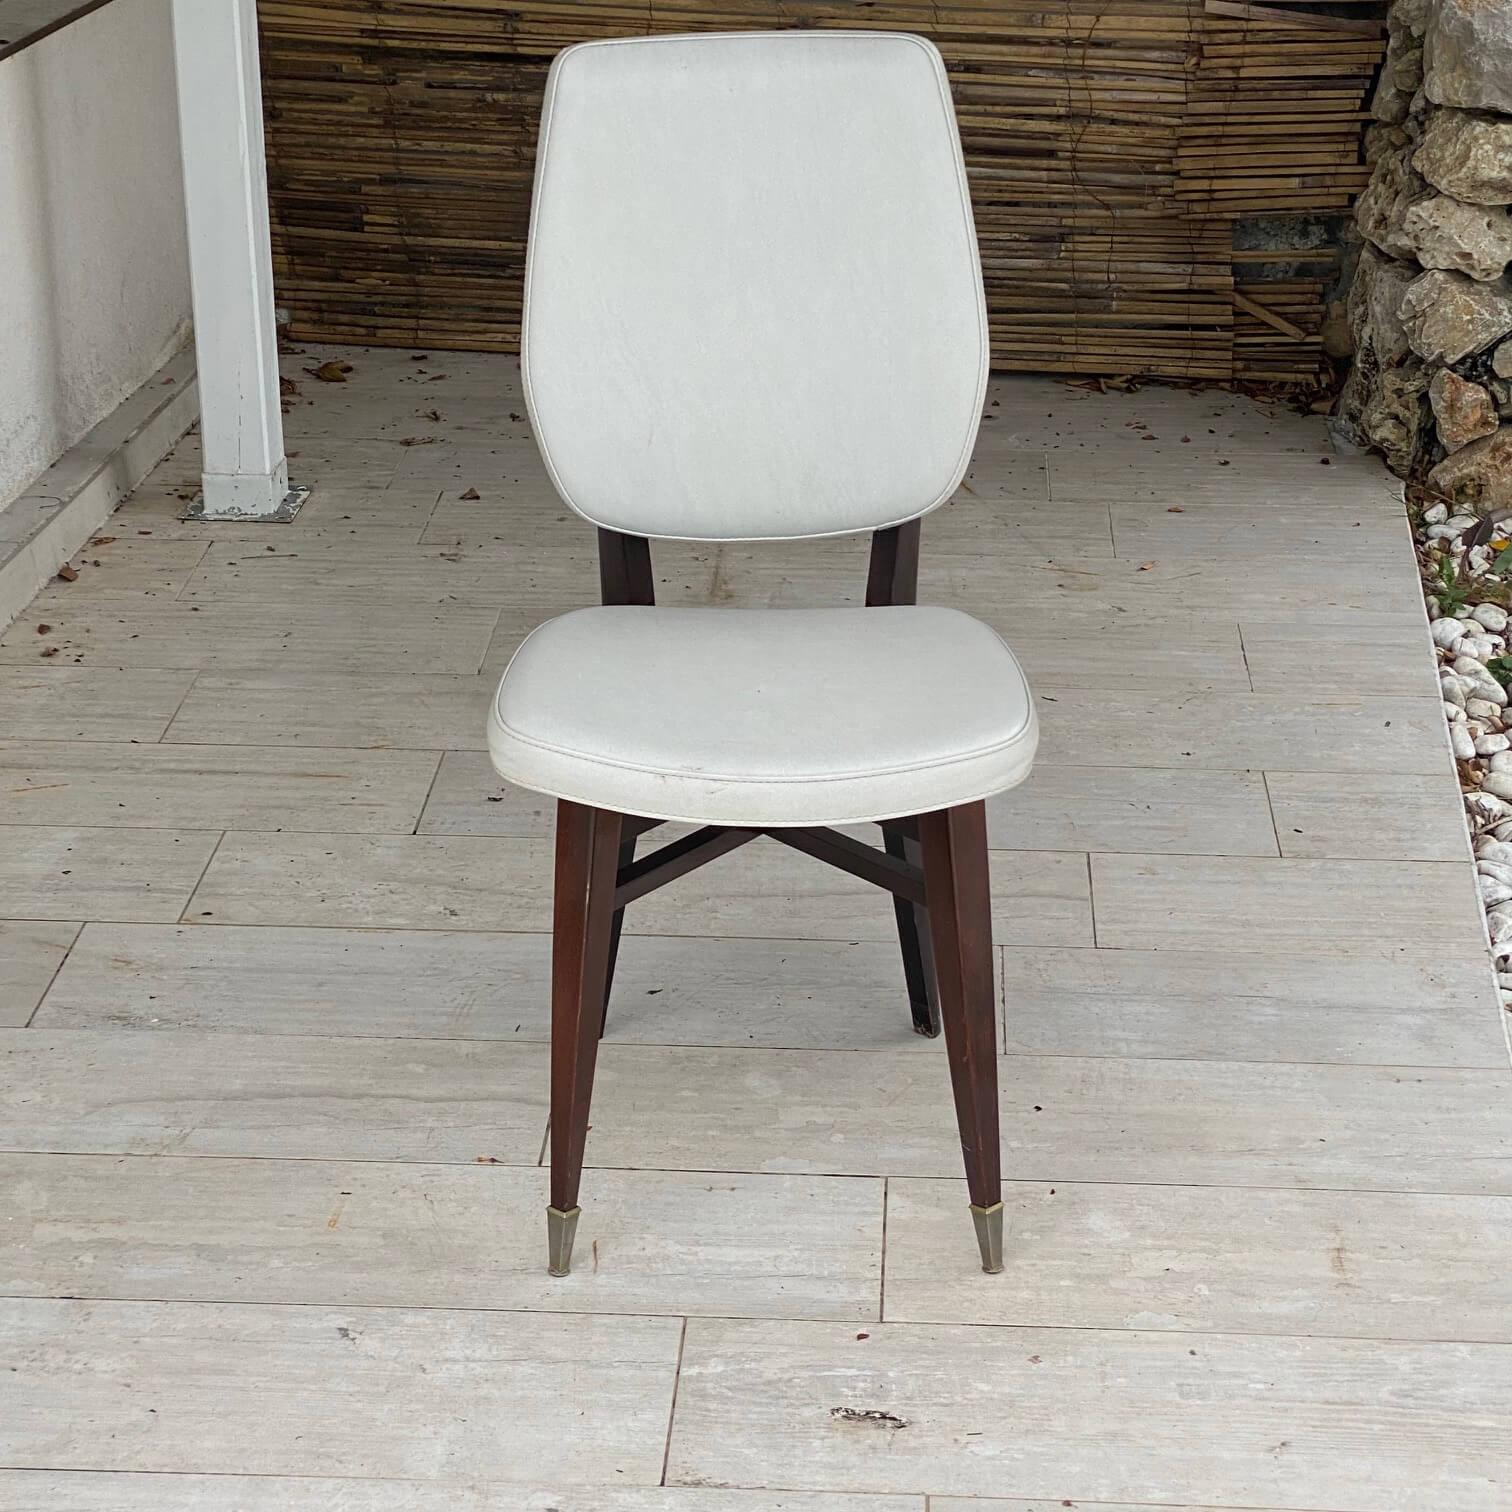 Mid-Century Modern Chair Vintage 1950 from France, in Grey Faux Leather, and Brown Wood